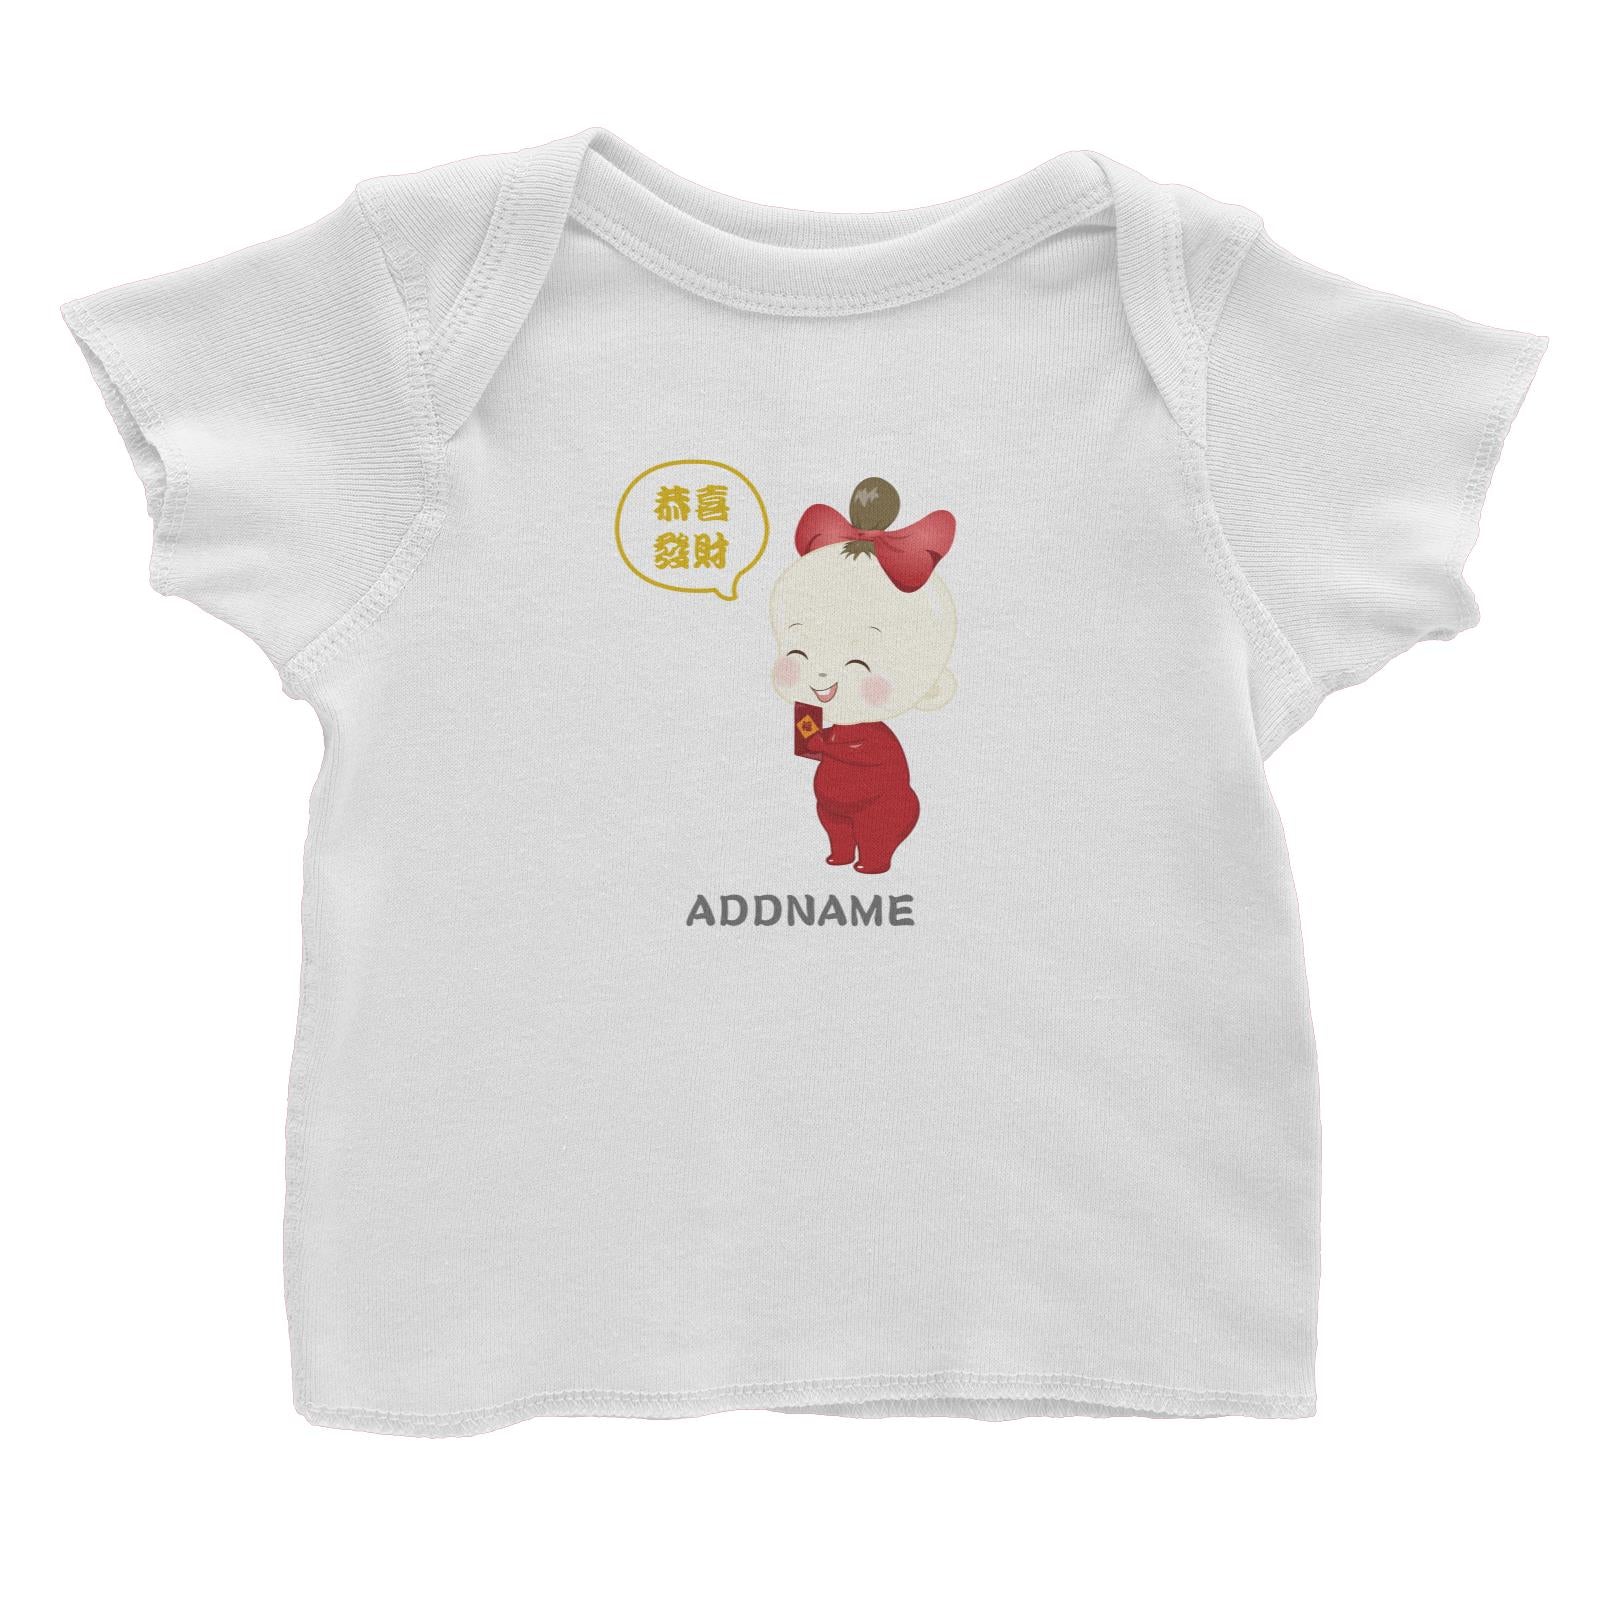 Chinese New Year Family Gong Xi Fai Cai Baby Girl Addname Baby T-Shirt